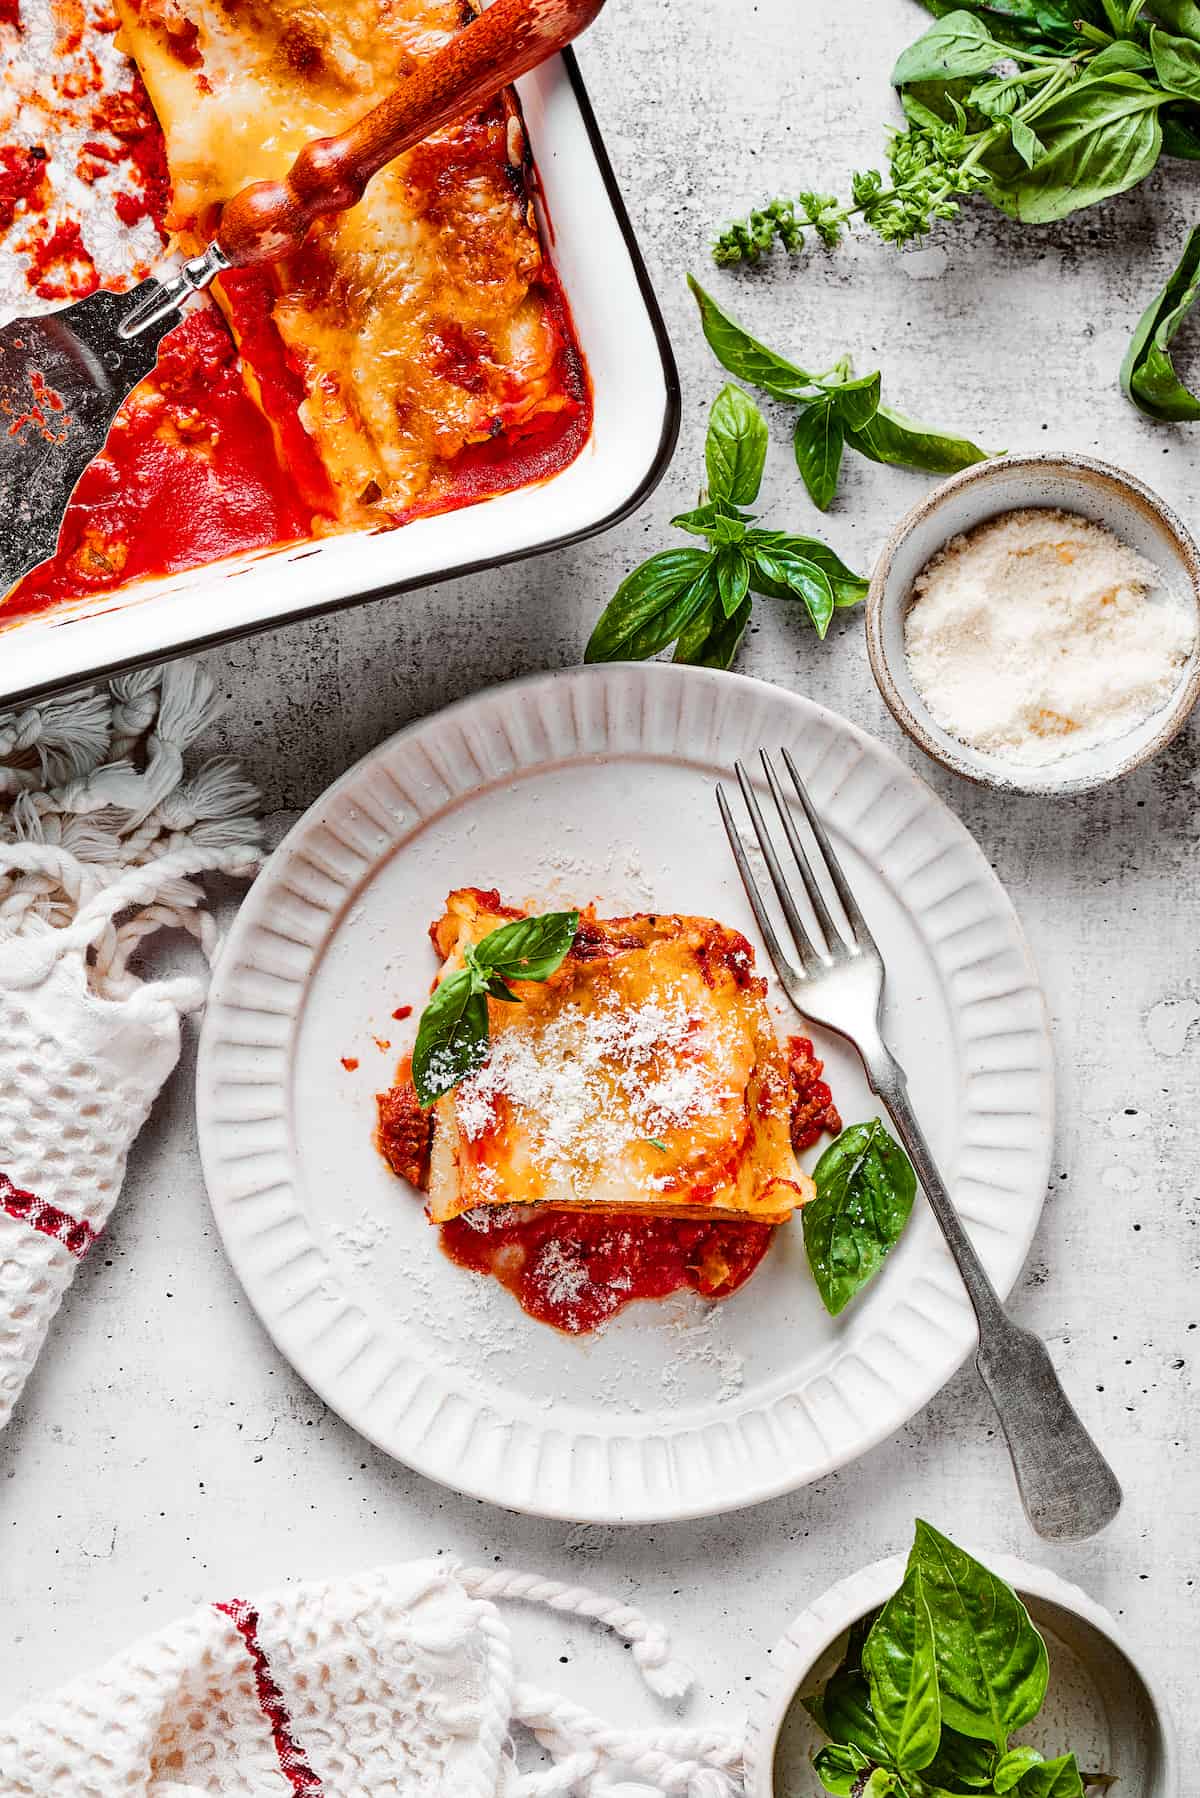 Overhead view of a lasagna roll up on a plate with a fork, next to a baking dish full of them and some basil leaves.